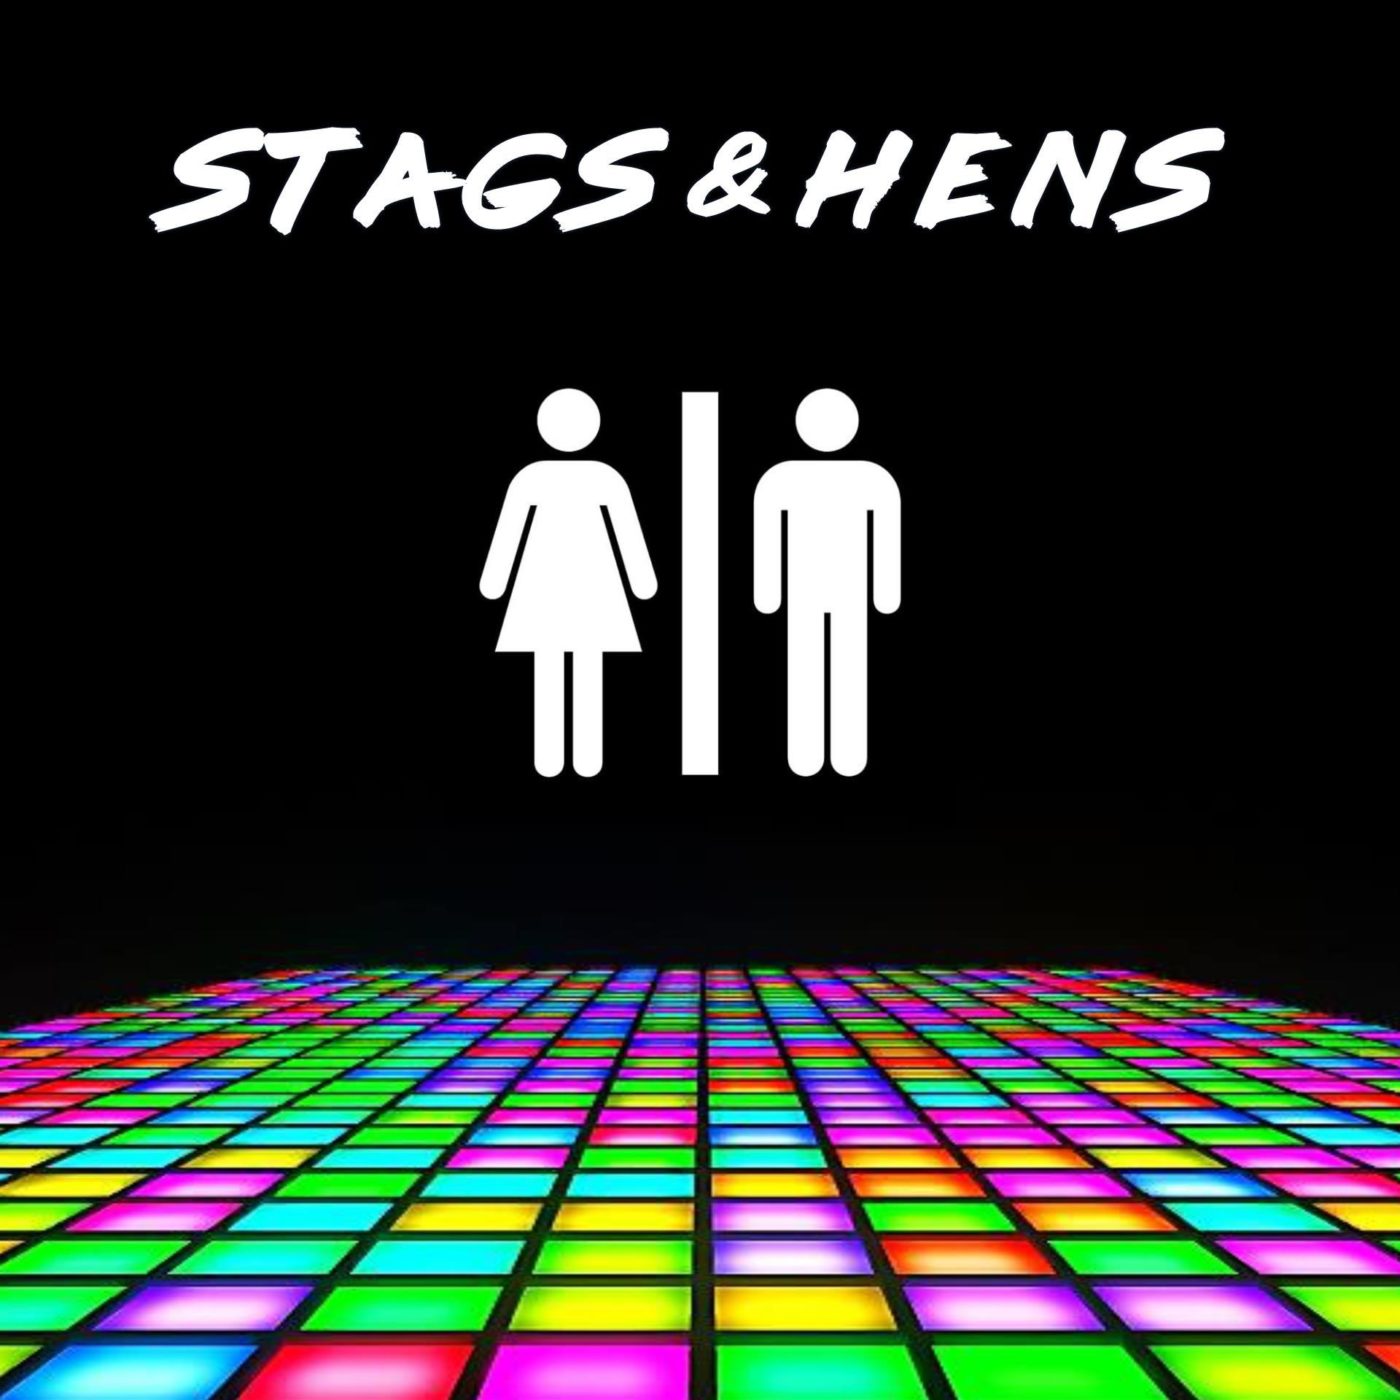 Theatre Group Present Stags and Hens